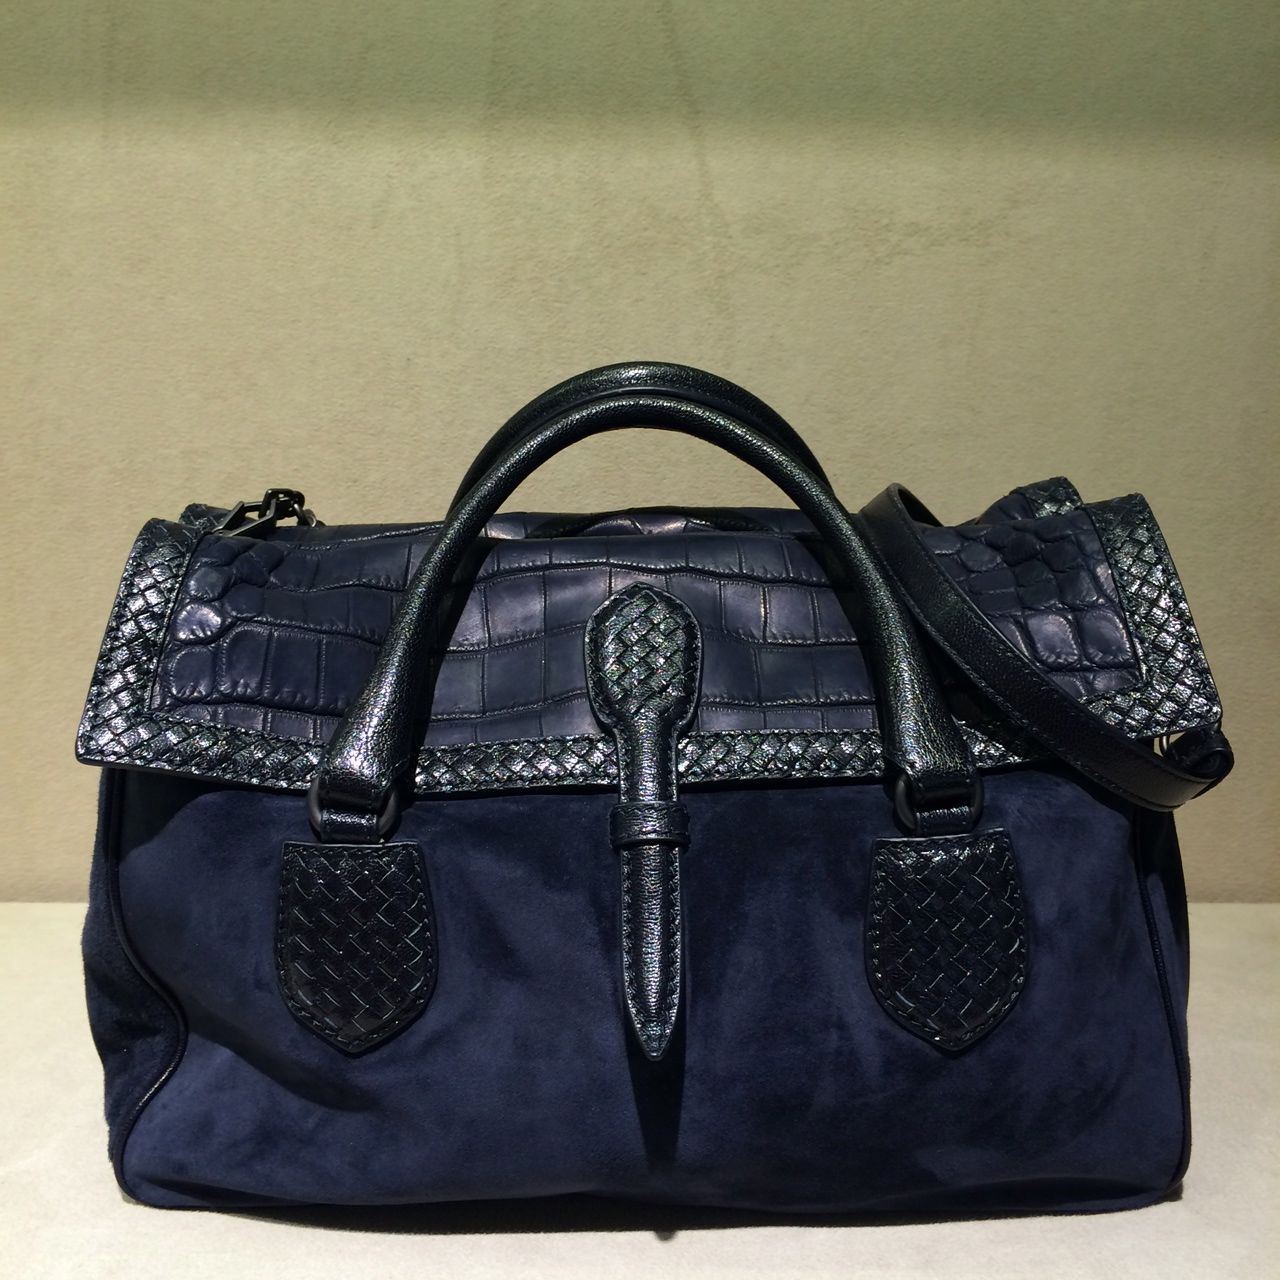 Preview of Bottega Veneta Spring / Summer 2015 Bags from Milan Showroom | Spotted Fashion